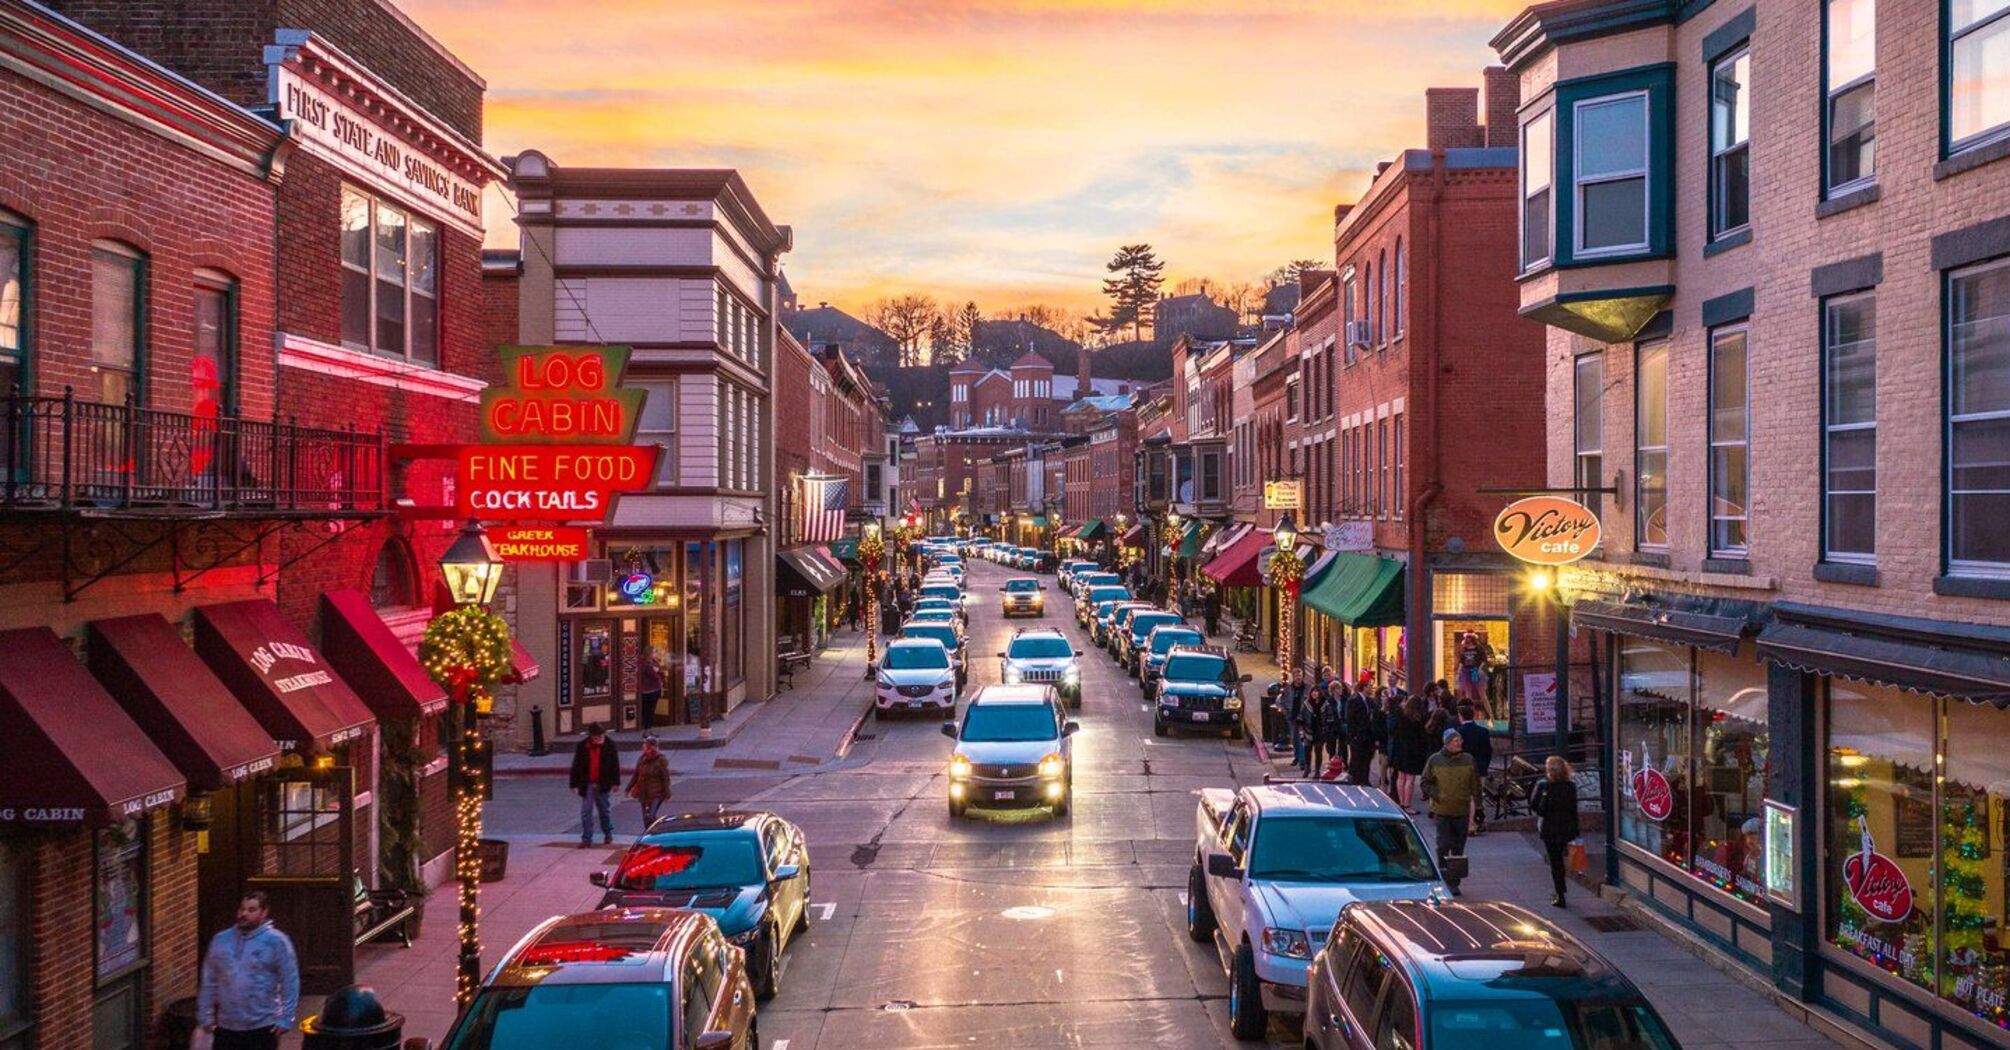 A guide to Galena: 8 reasons to visit one of the most beautiful cities in the USA